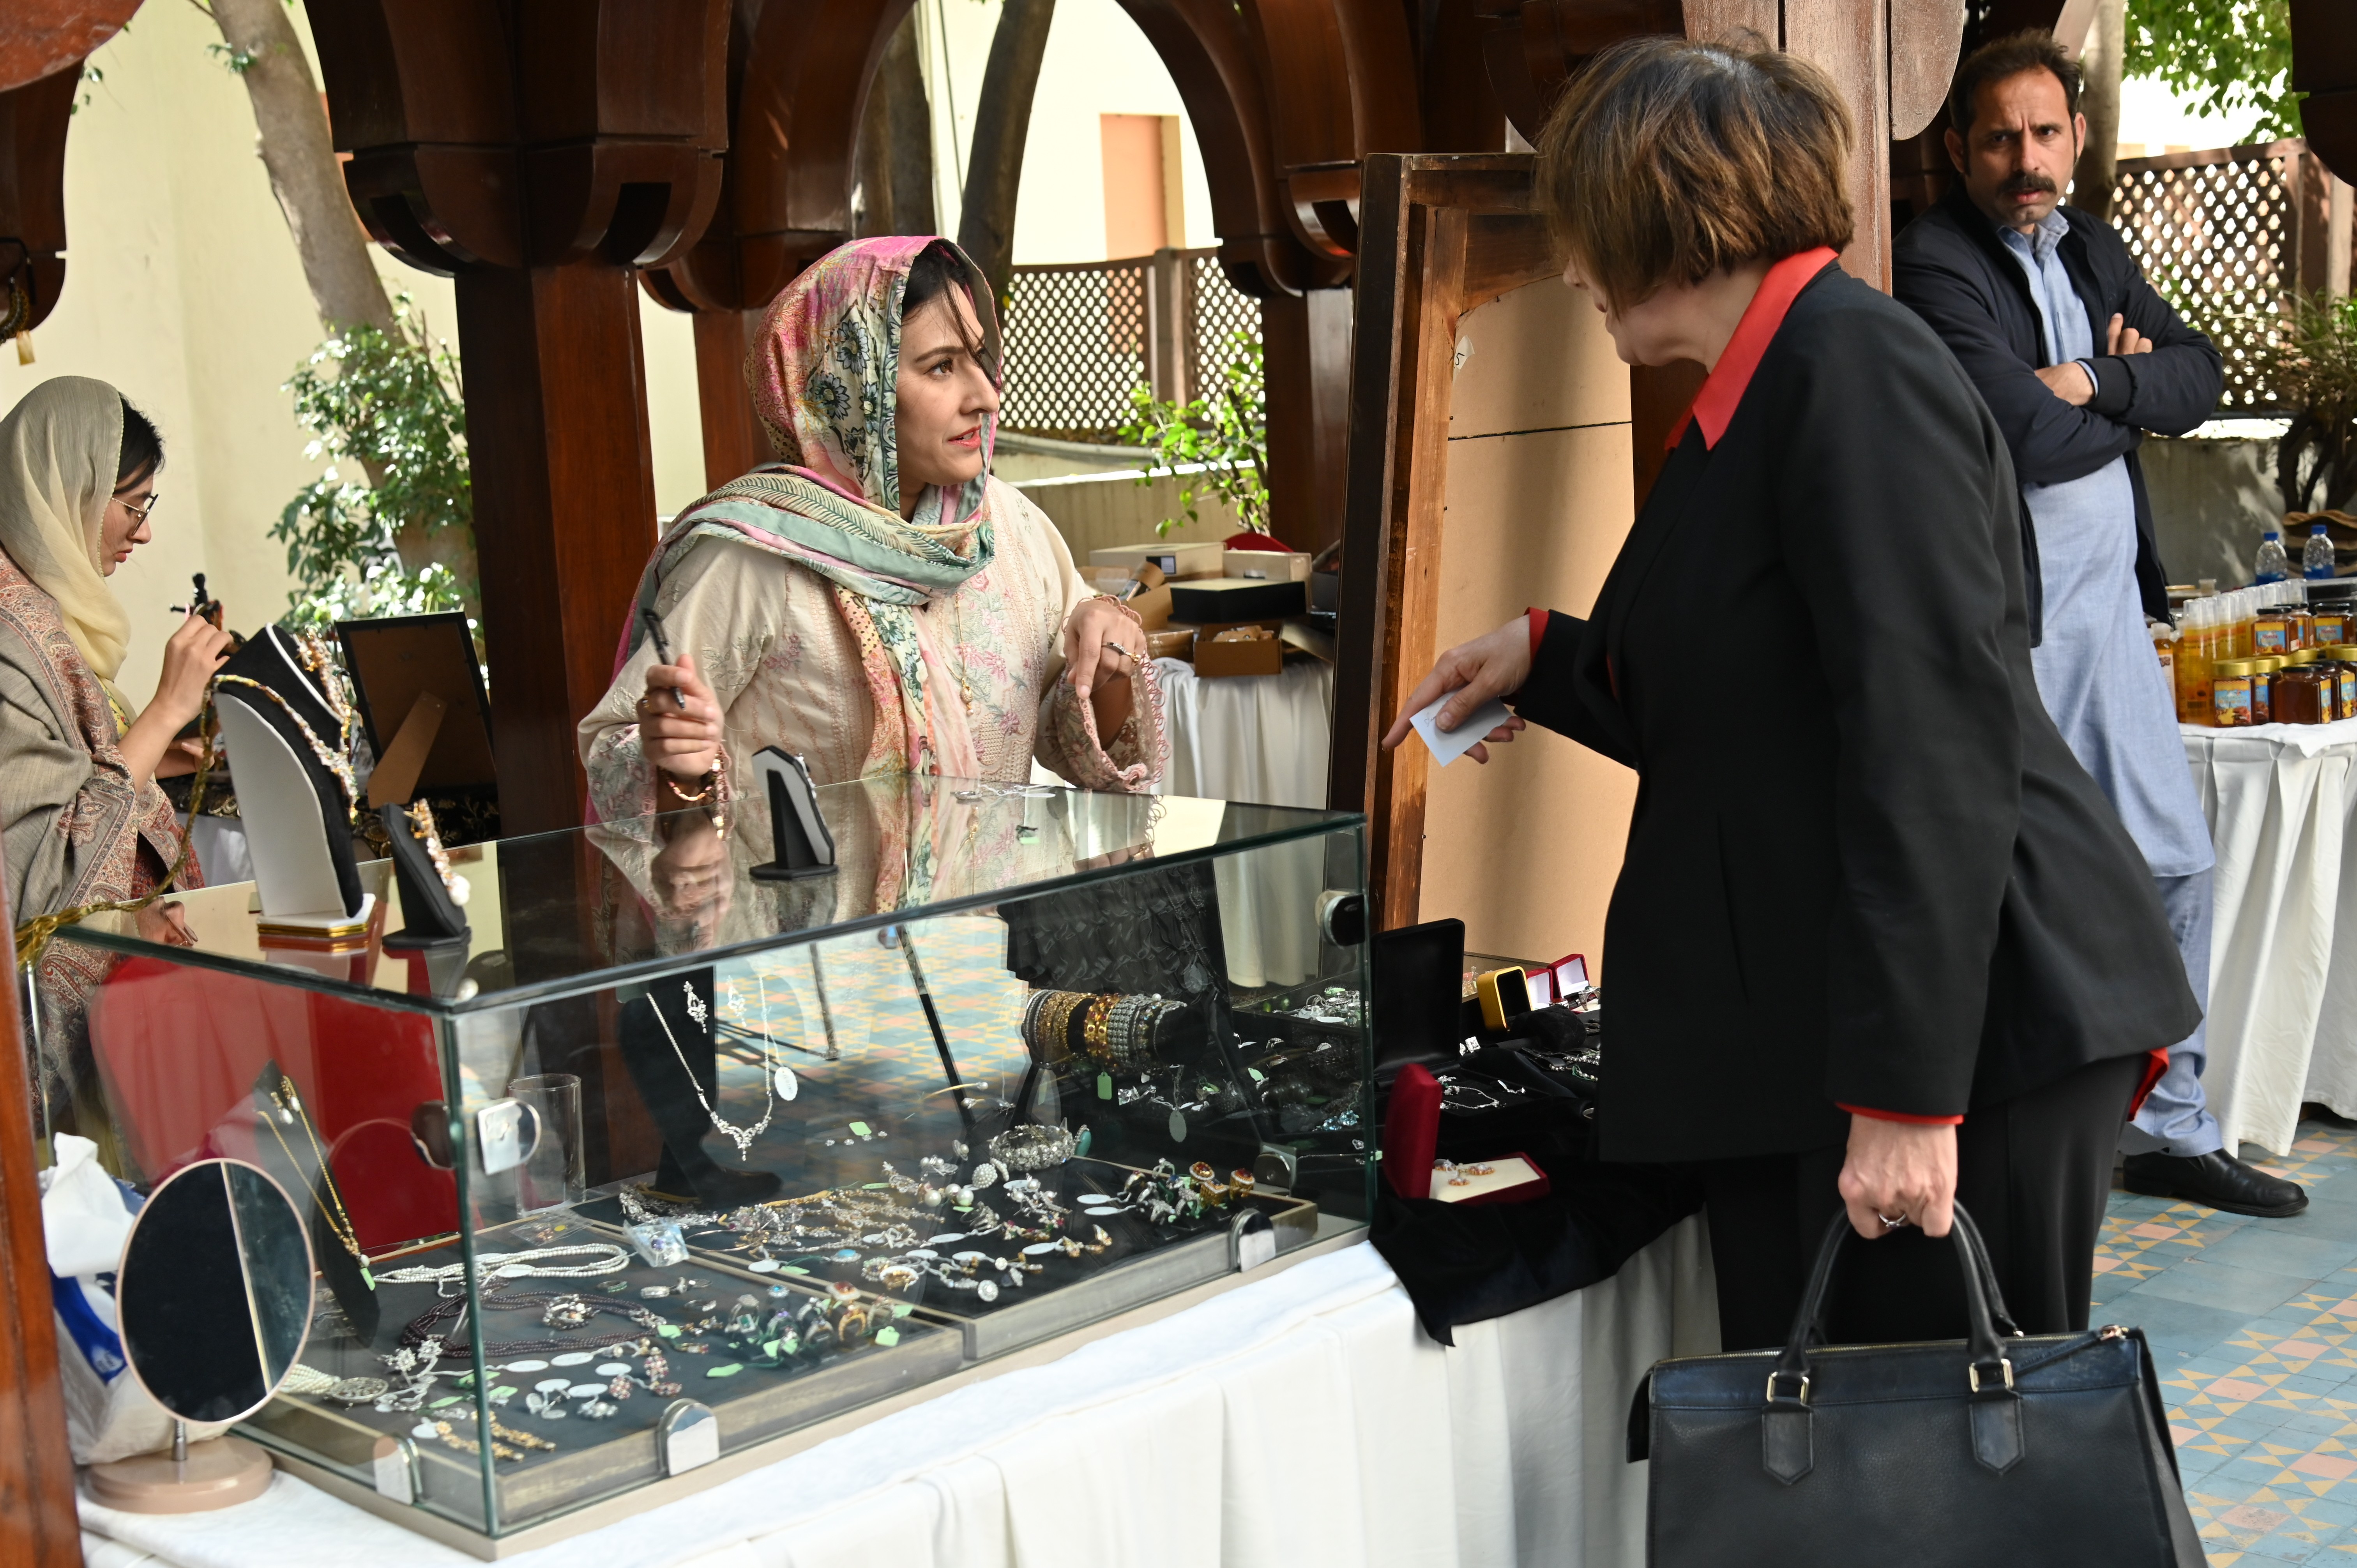 A woman selling beautiful jewelry at the Crafts Festival